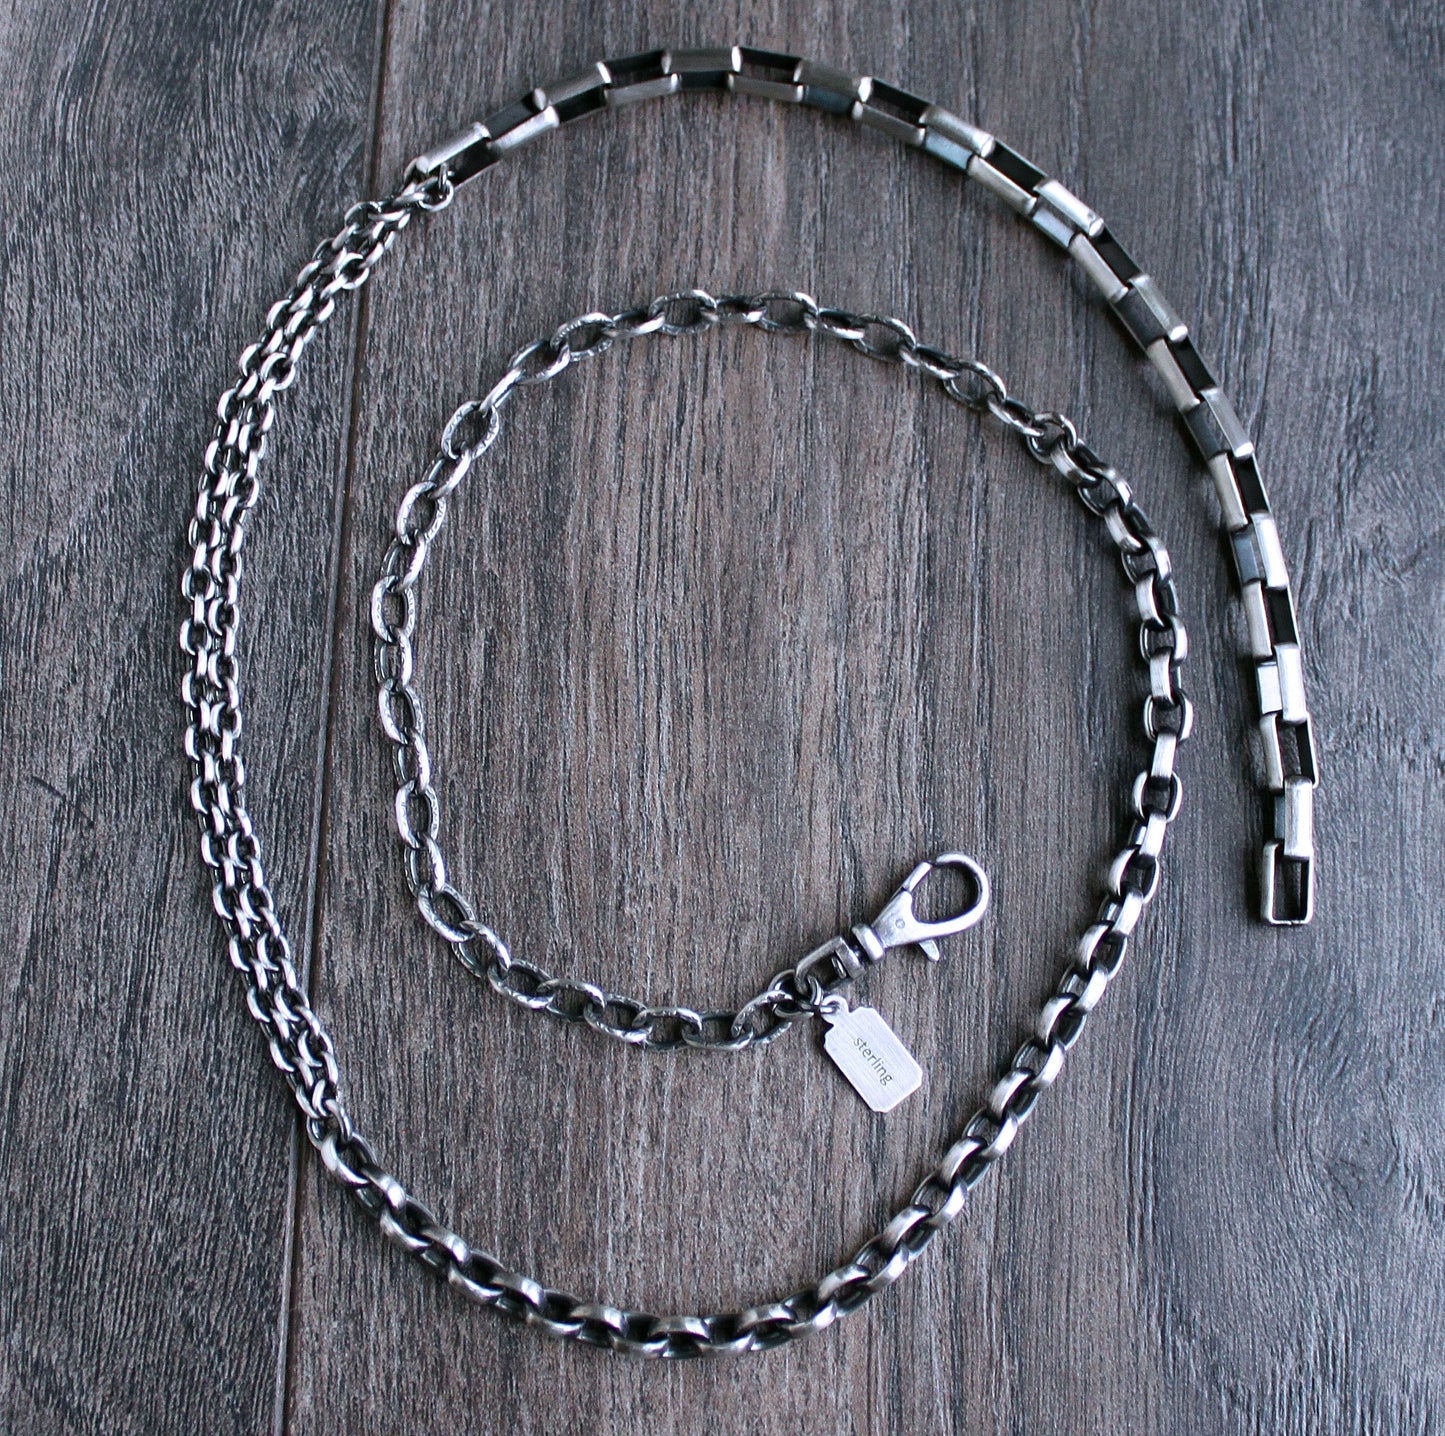 Silver Mixed Chain Necklace, 26 inches